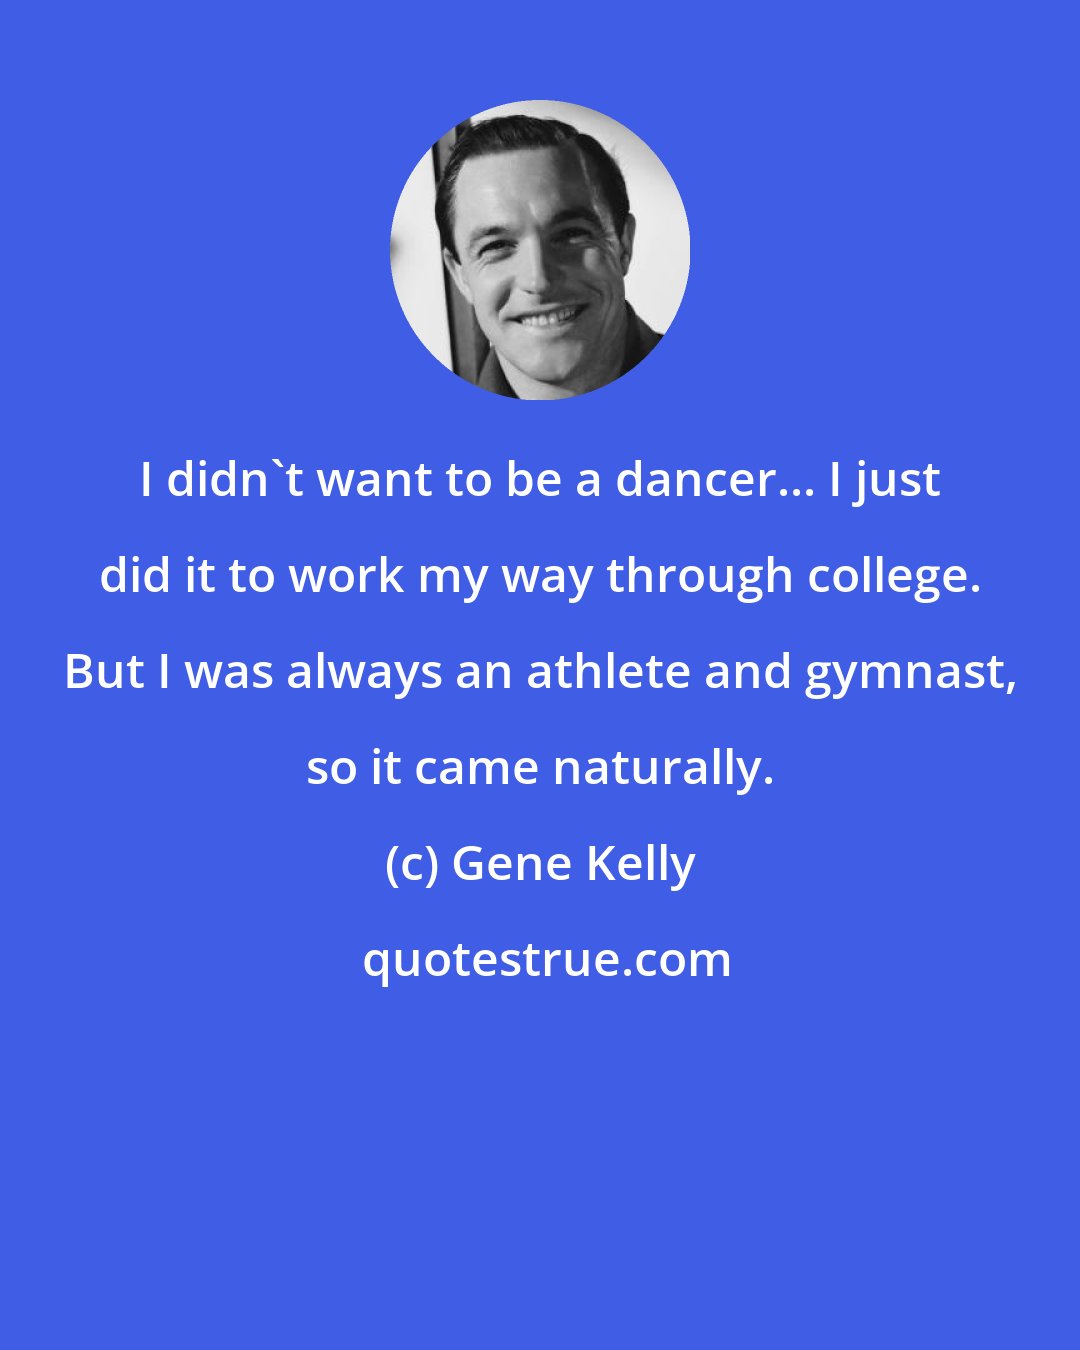 Gene Kelly: I didn't want to be a dancer... I just did it to work my way through college. But I was always an athlete and gymnast, so it came naturally.